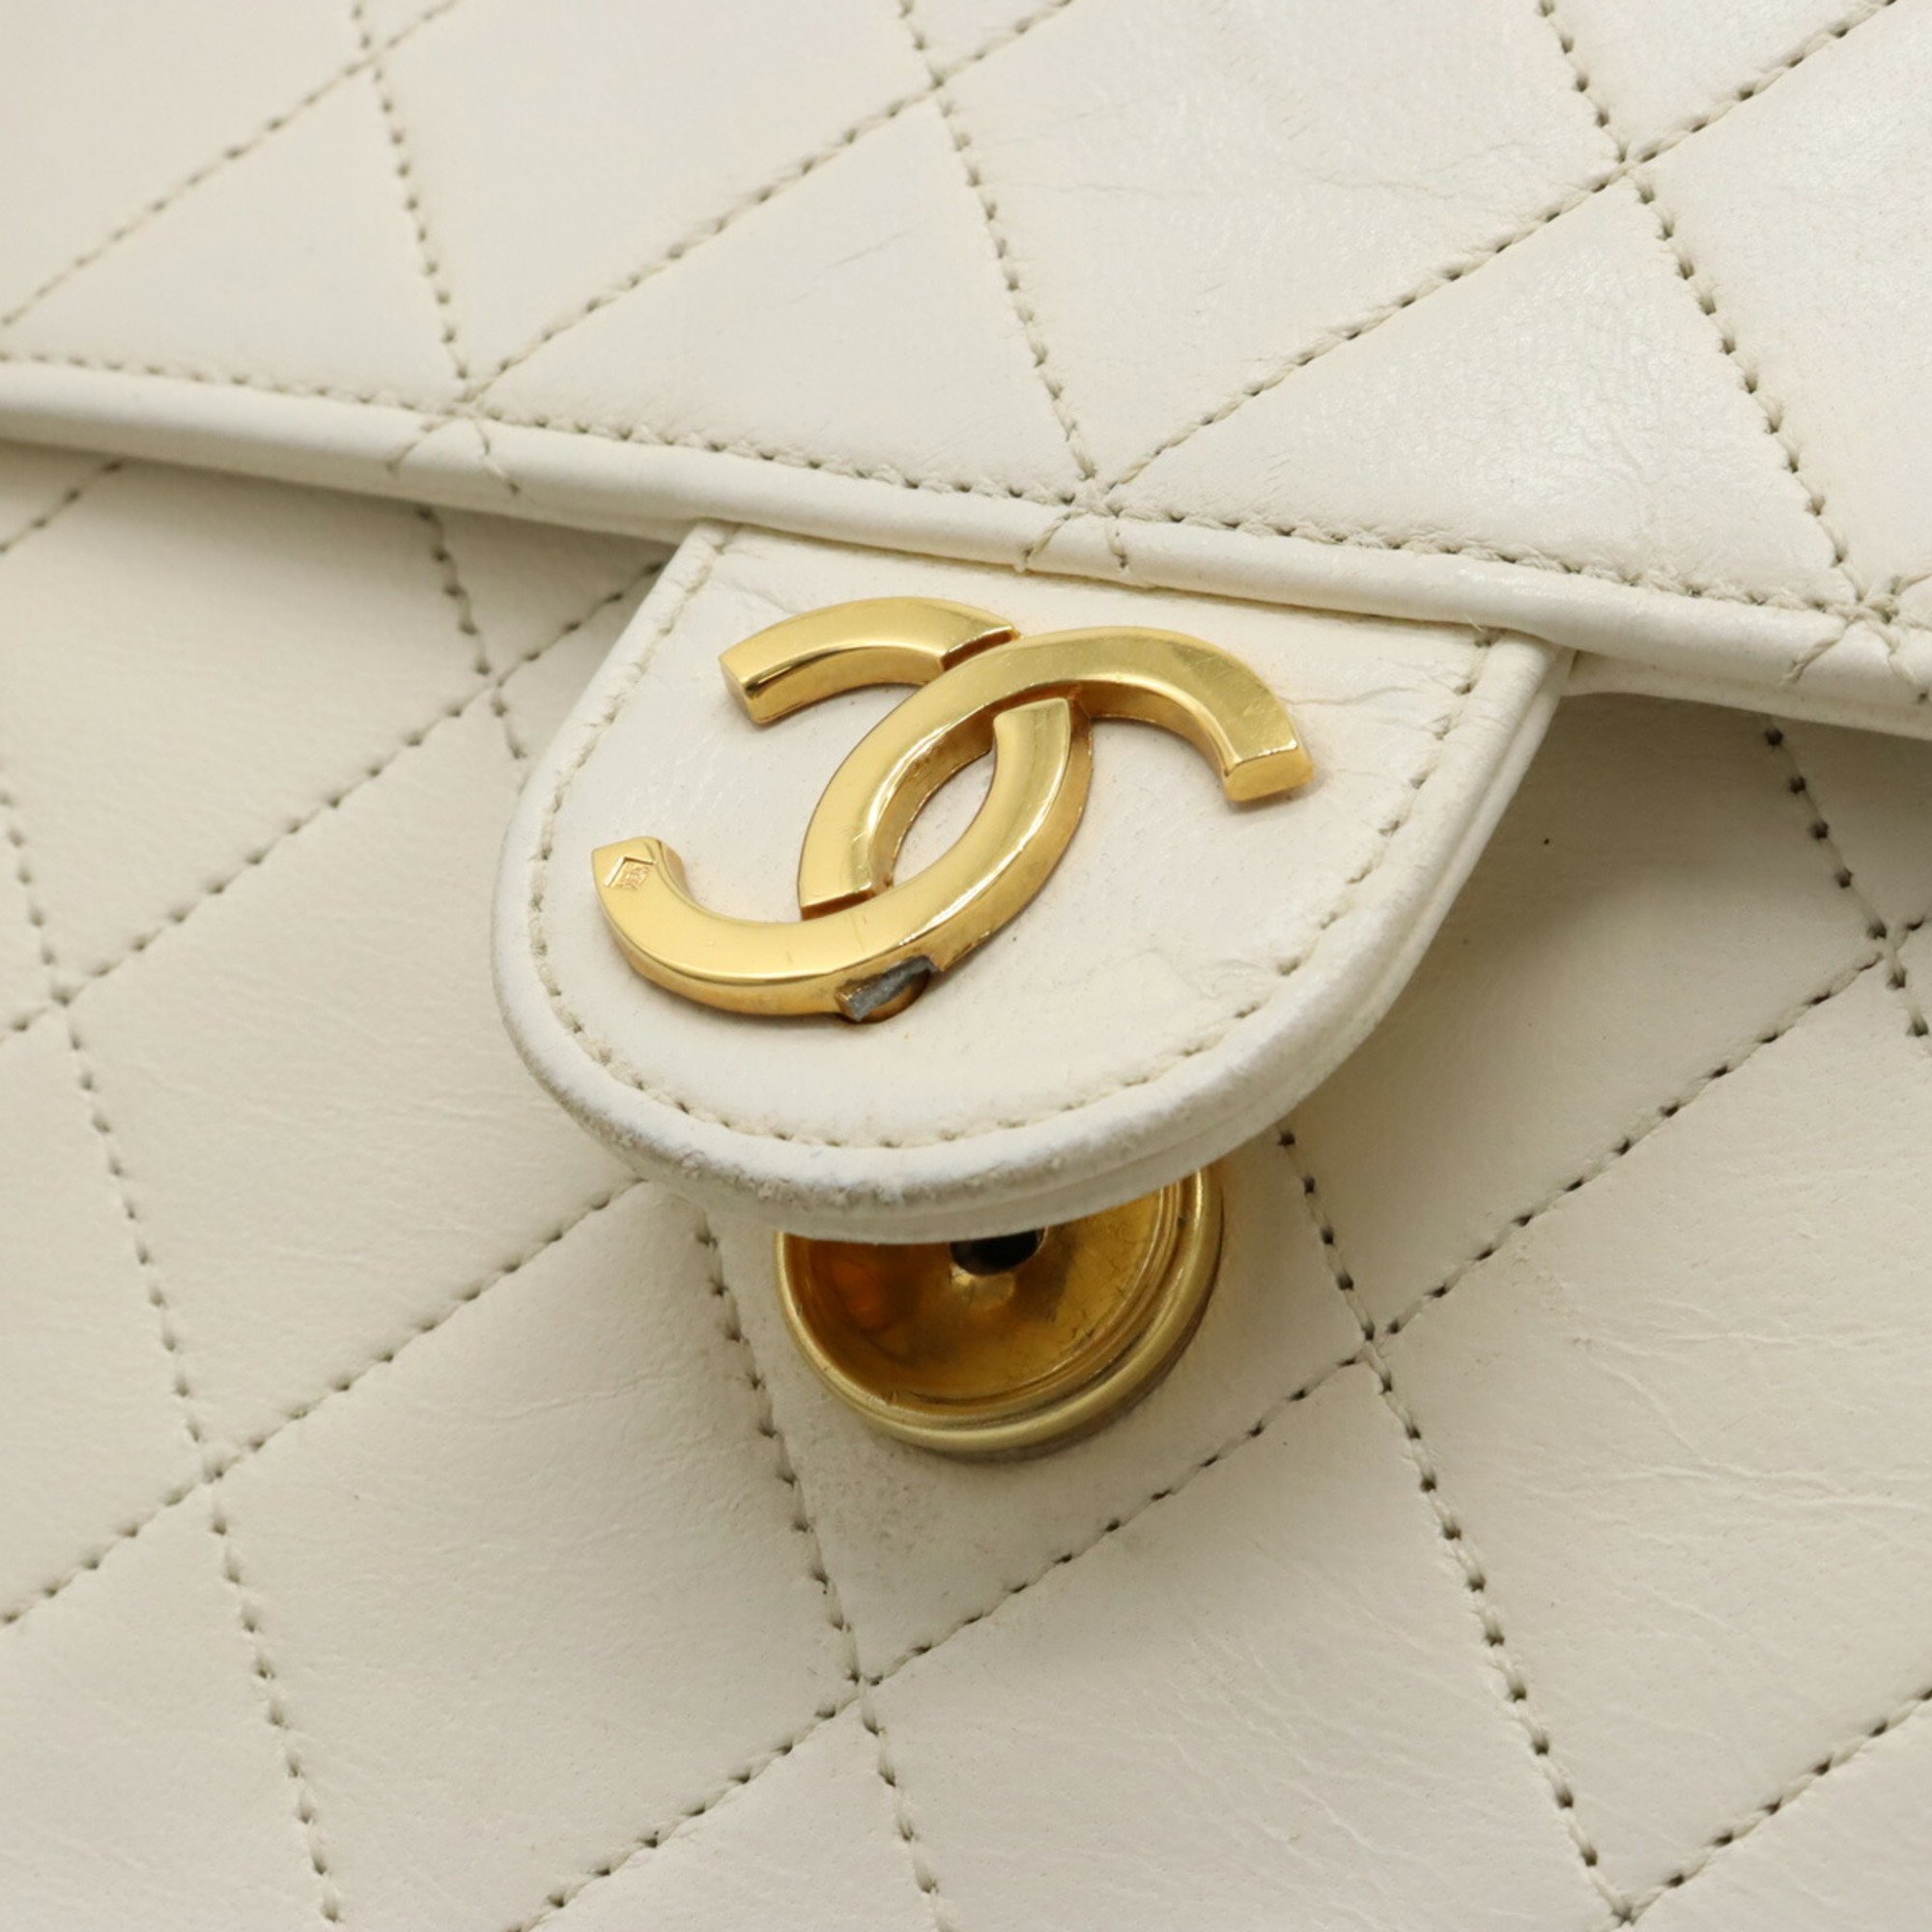 CHANEL Chanel Matelasse Coco Mark Chain Bag Shoulder Leather White